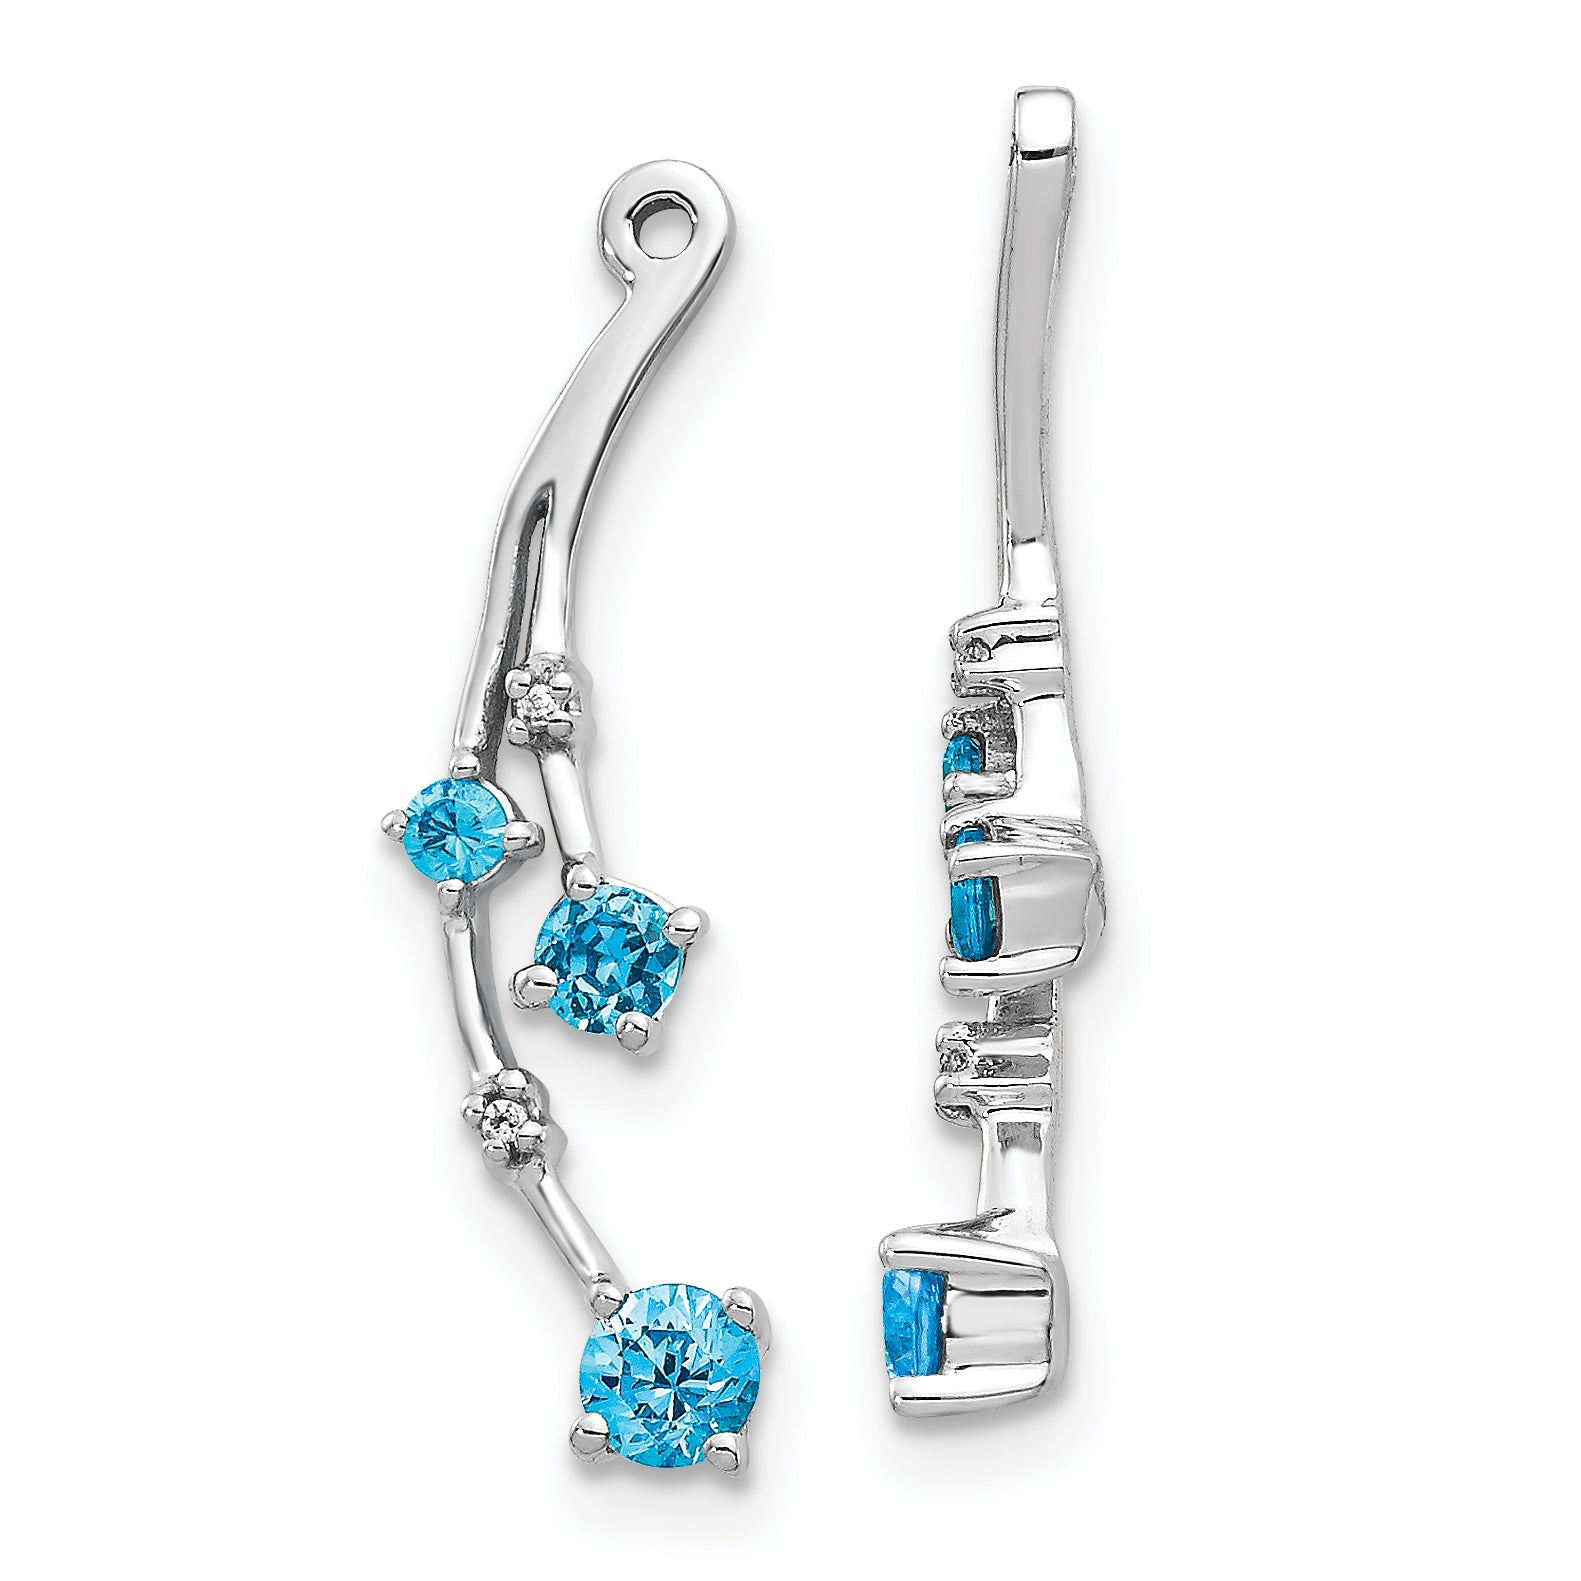 Image of ID 1 14K White Gold Diamond and Blue Topaz Dangle Earring Jackets